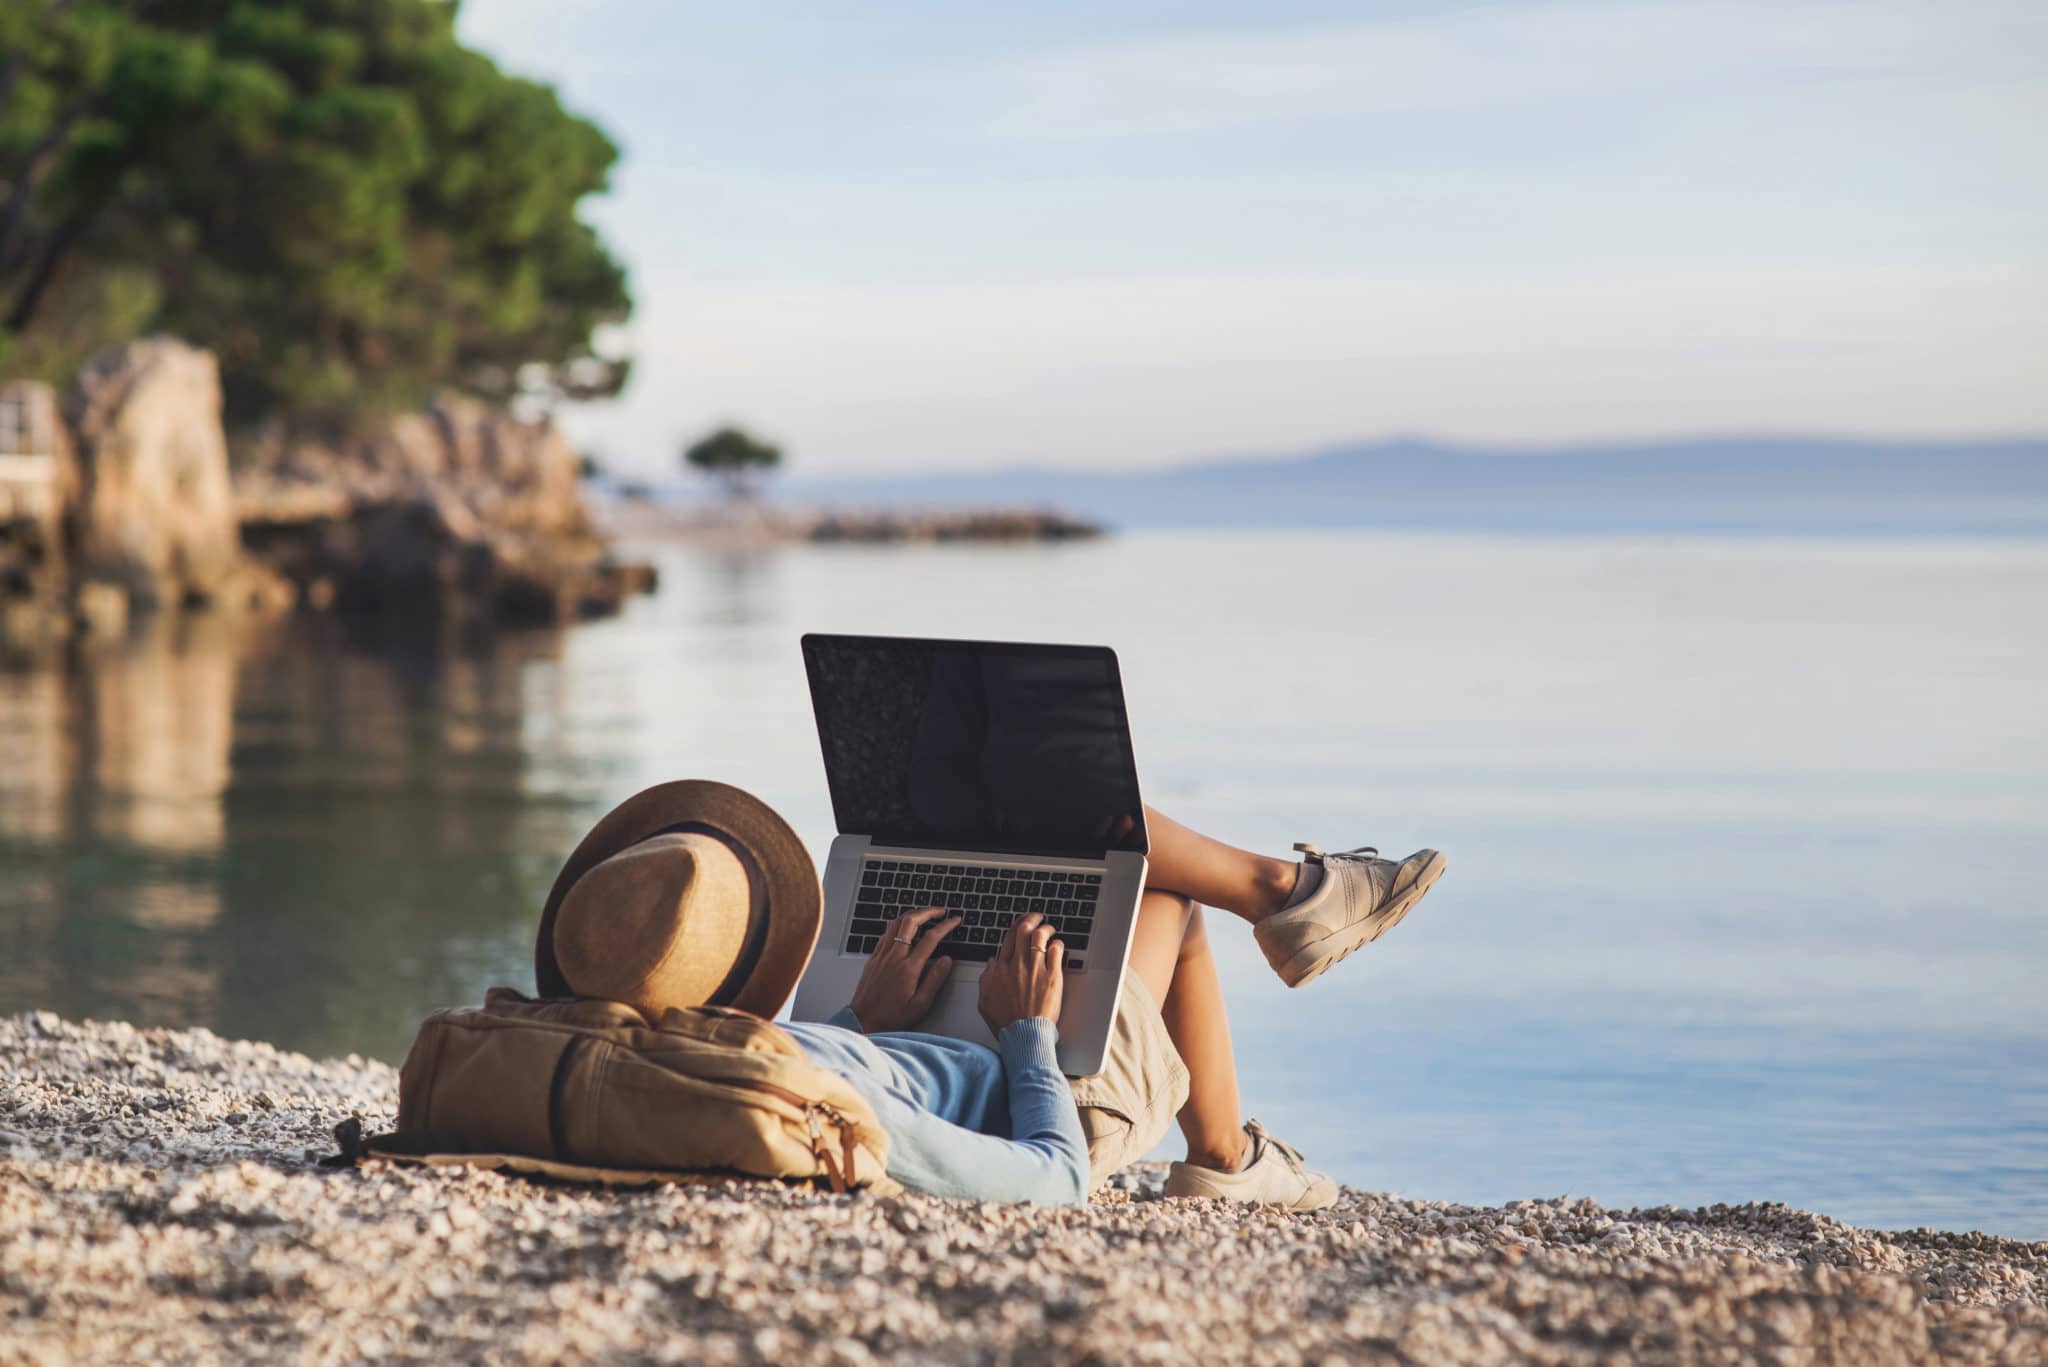 Tech to Help You Work at the Beach This Summer